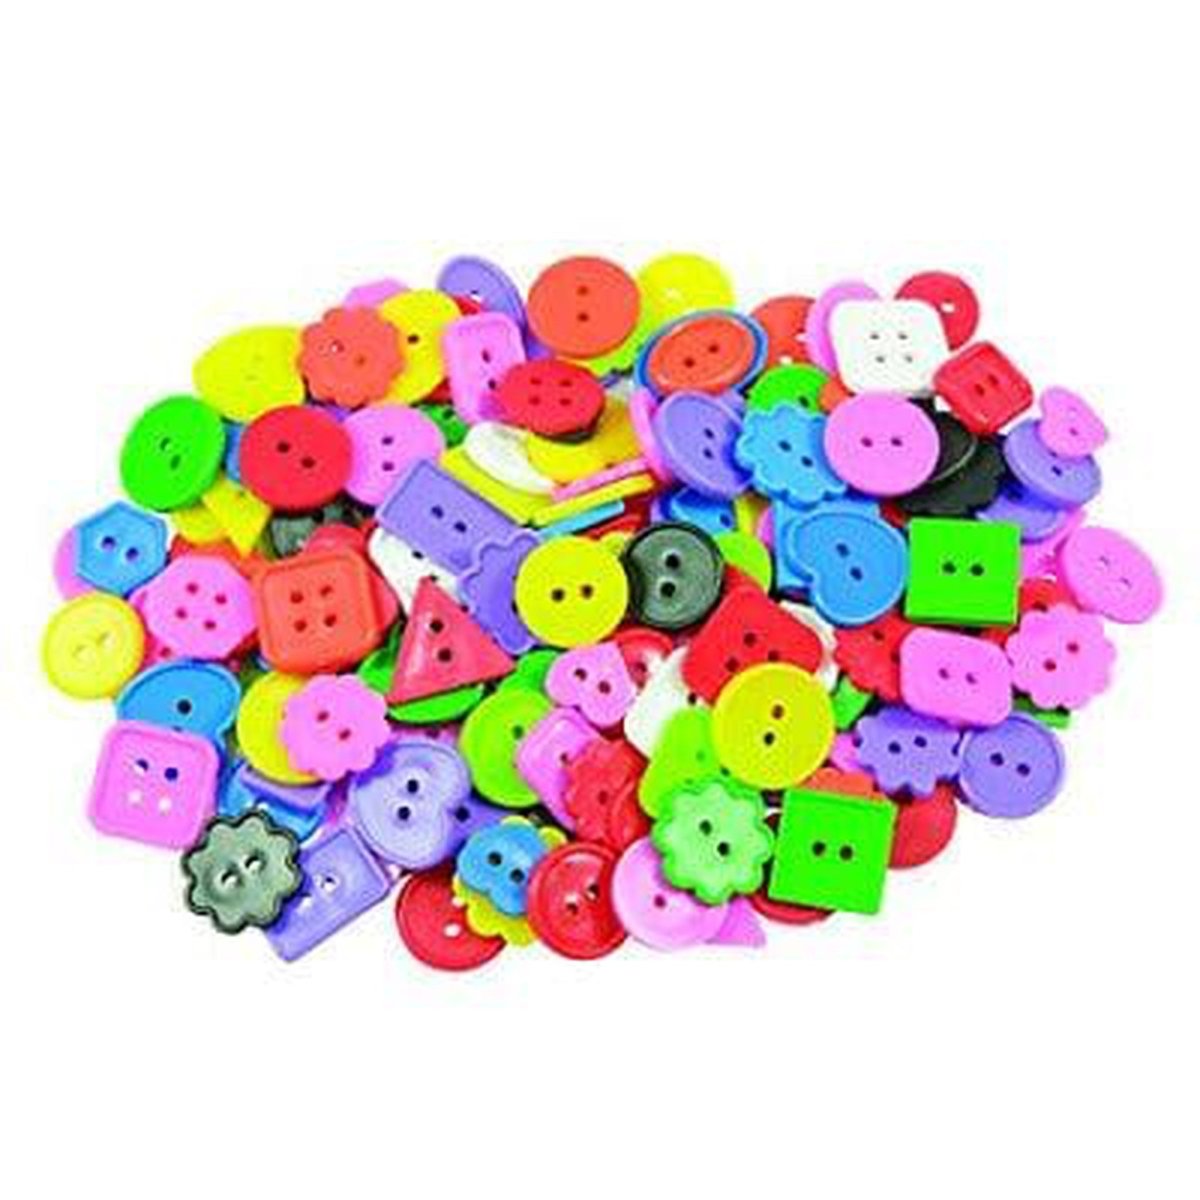 Bright Buttons, Assorted Sizes, Shapes and Colours - Kids Party Craft